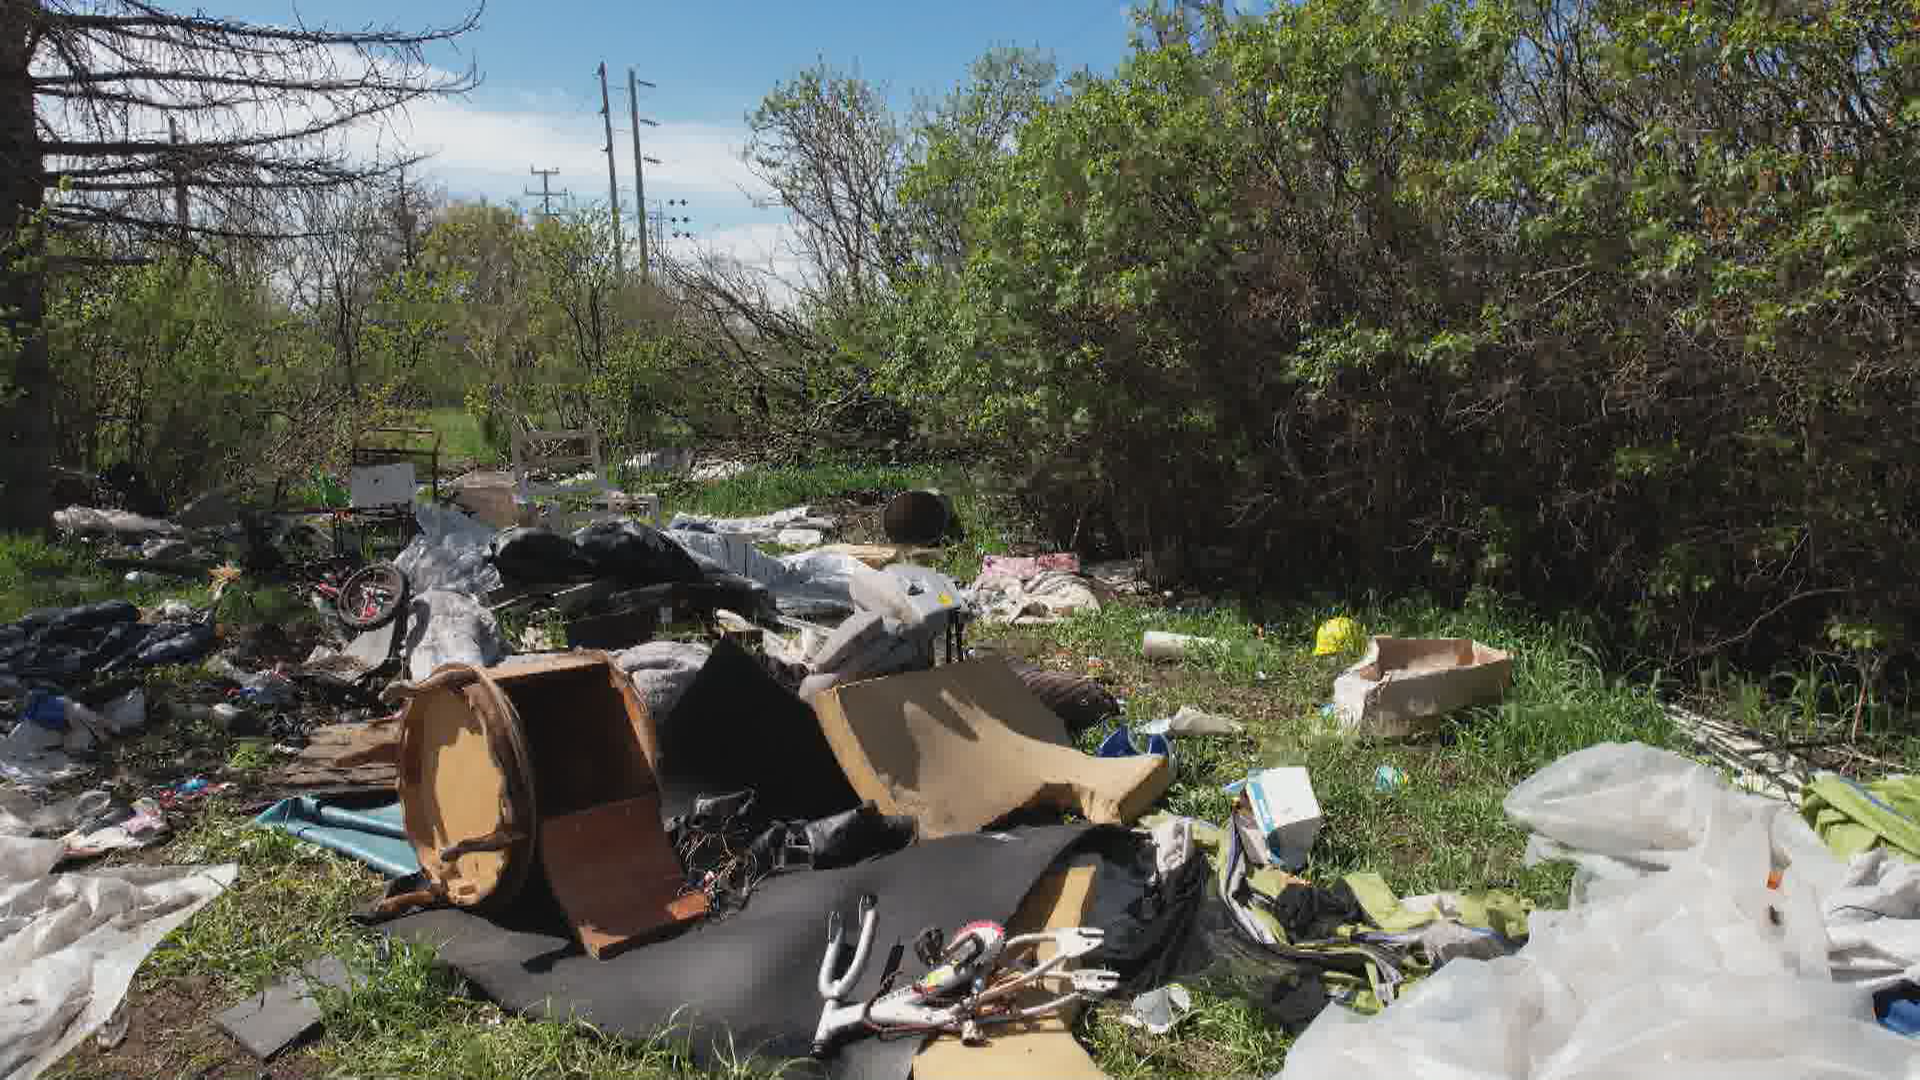 City and province squabble over Calgarian’s encampment cleanup request